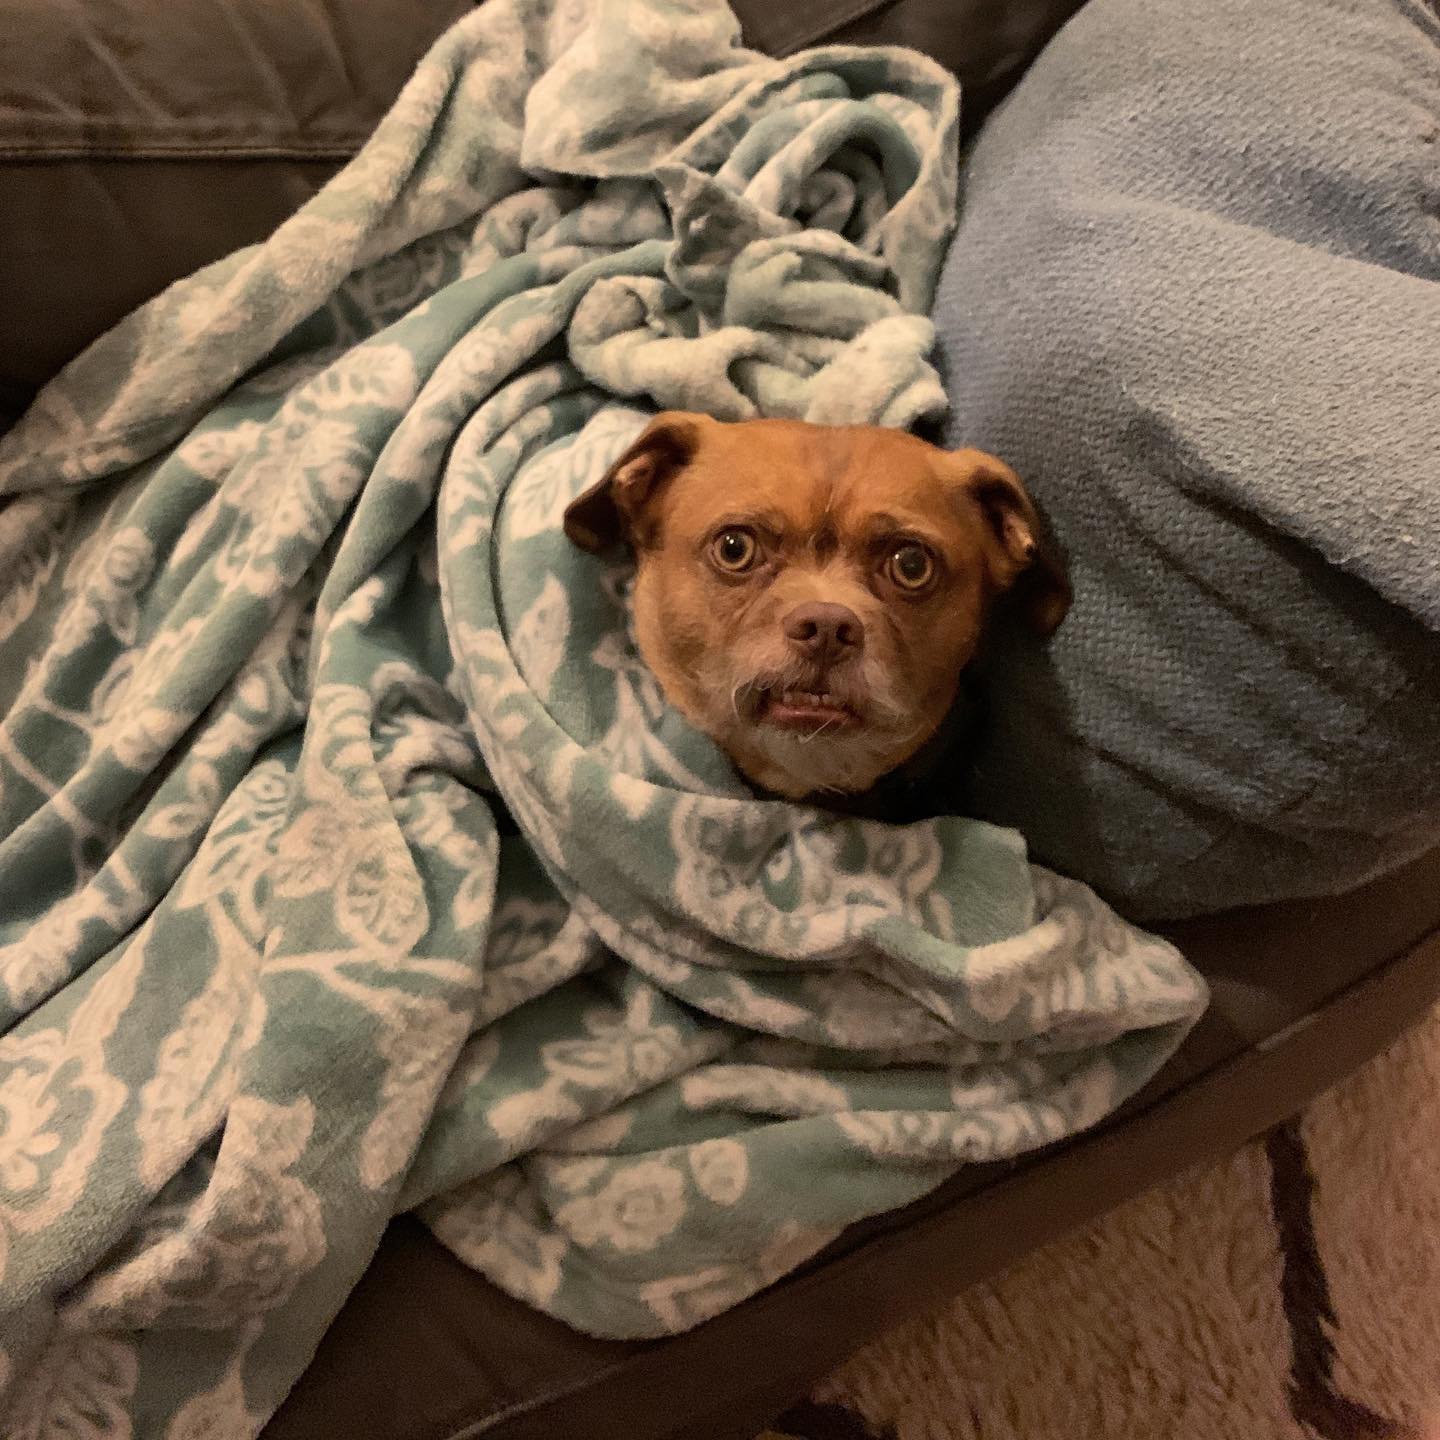 Bacon the dog sitting in pile of blankets